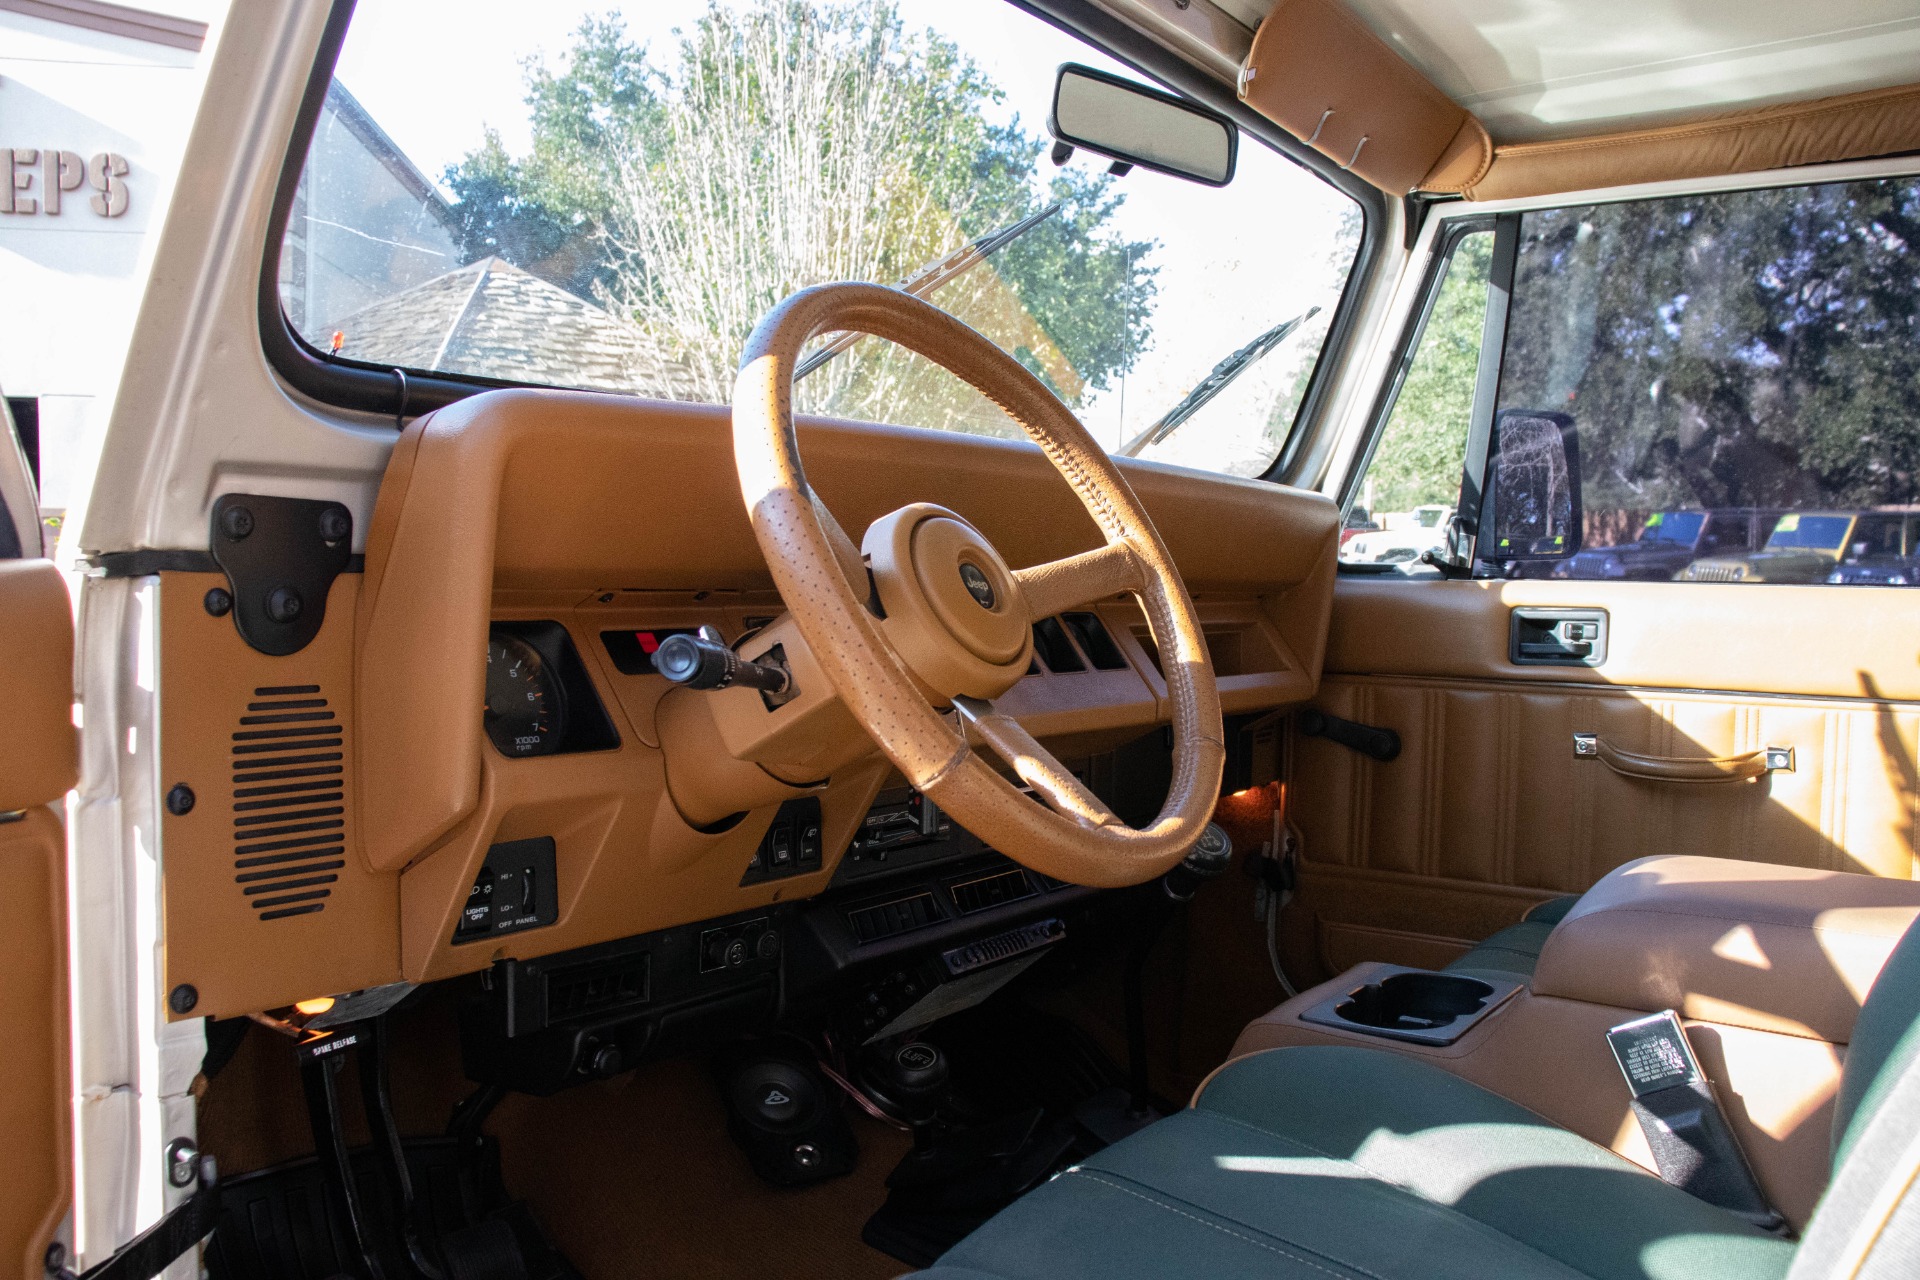 Used 1995 Jeep Wrangler Sahara For Sale (Special Pricing) | Select Jeeps  Inc. Stock #287842